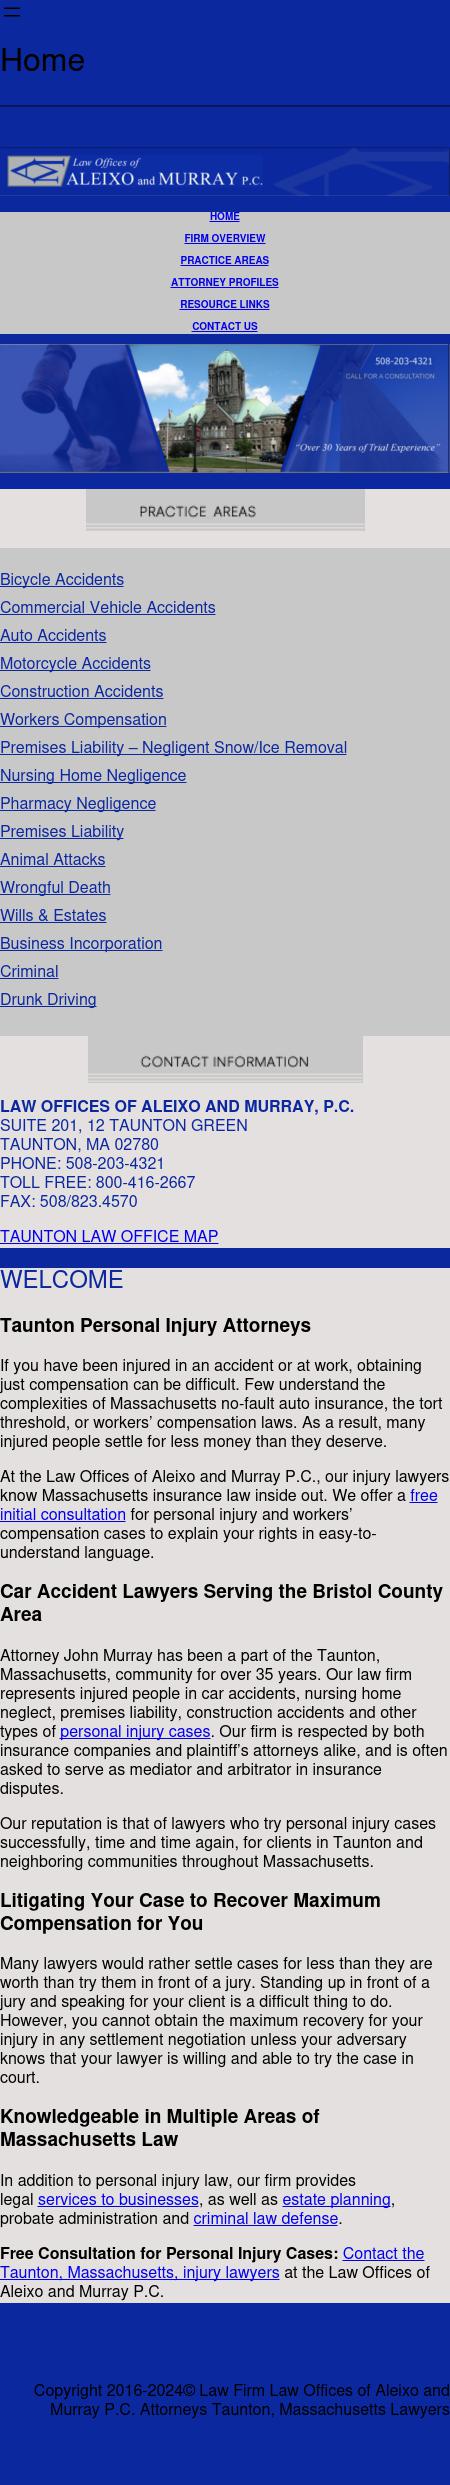 Law Offices of Aleixo and Murray, P.C. - Taunton MA Lawyers